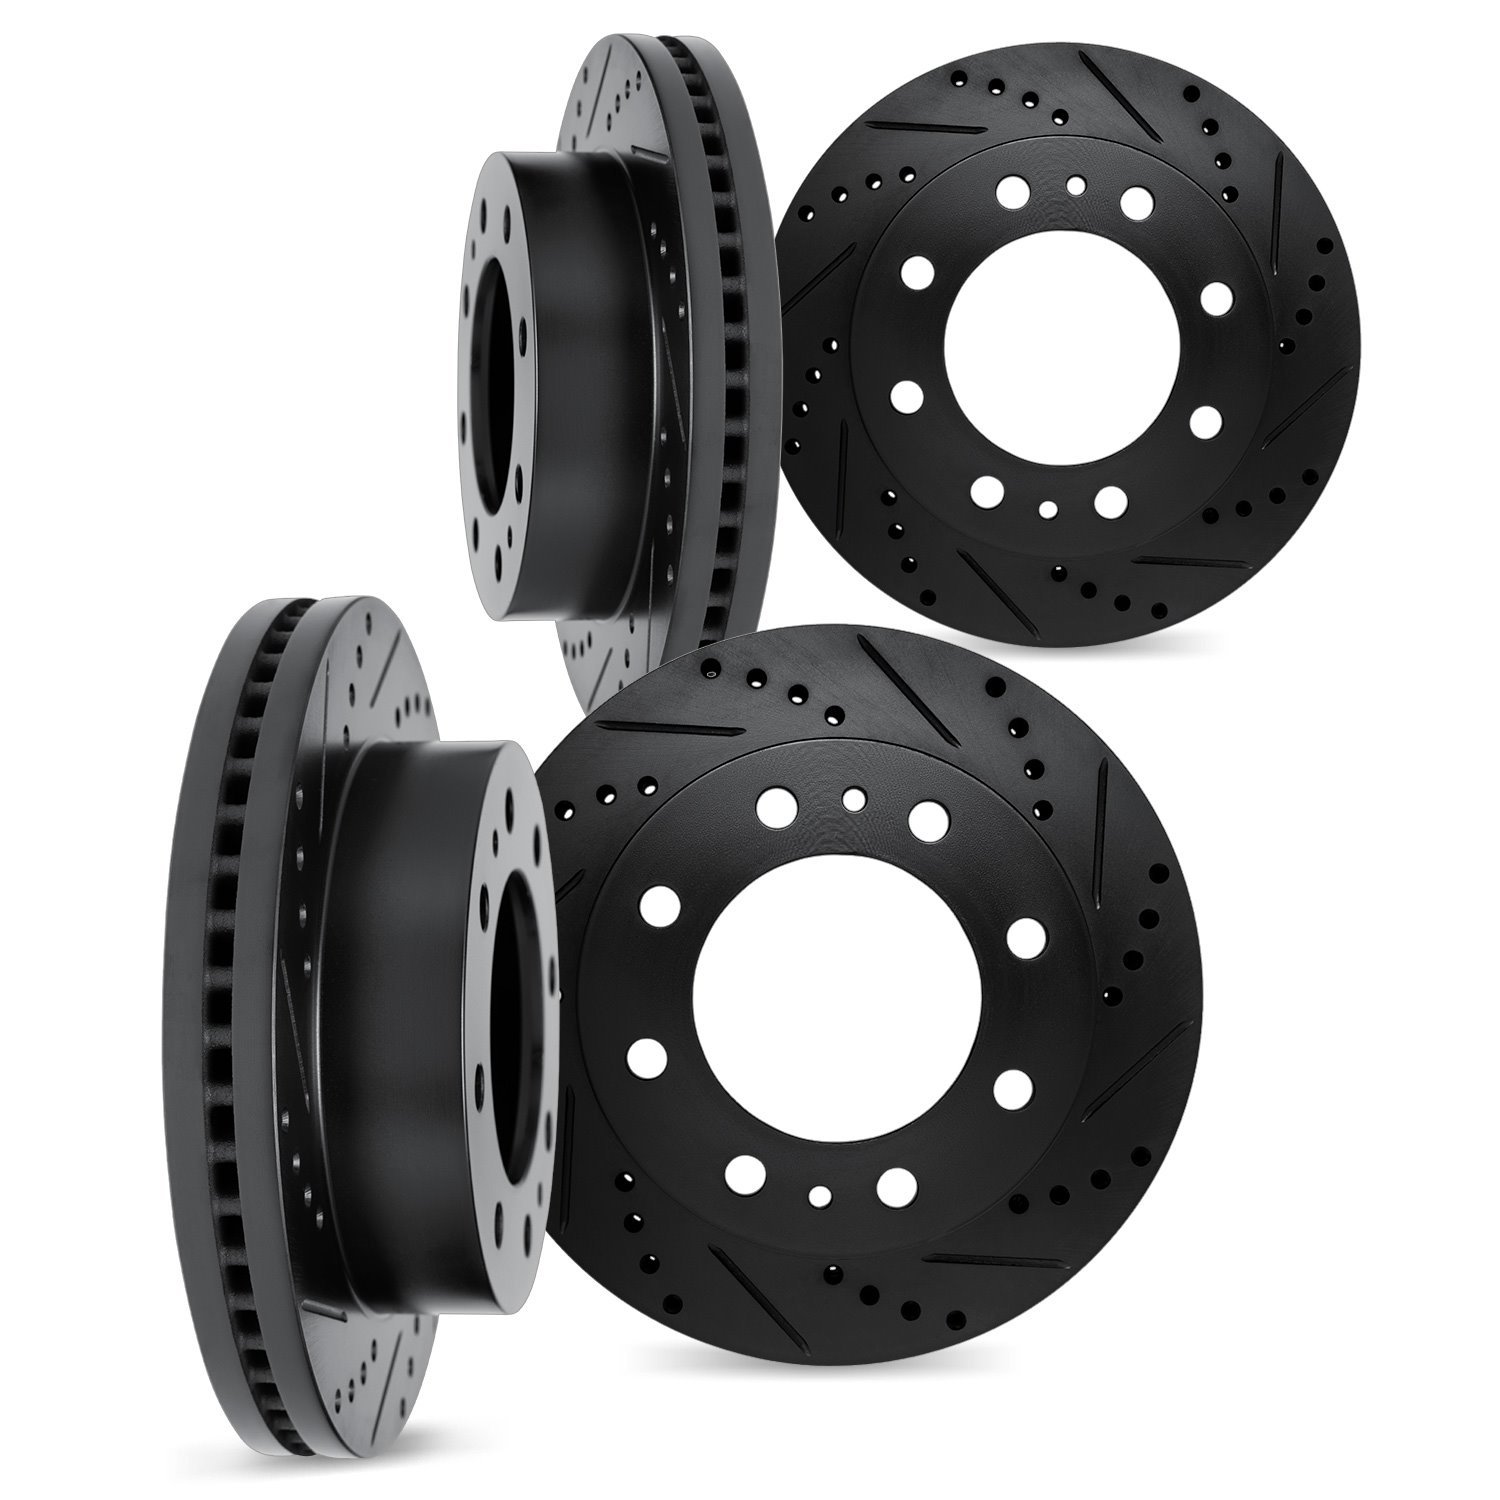 8004-48012 Drilled/Slotted Brake Rotors [Black], Fits Select GM, Position: Front and Rear